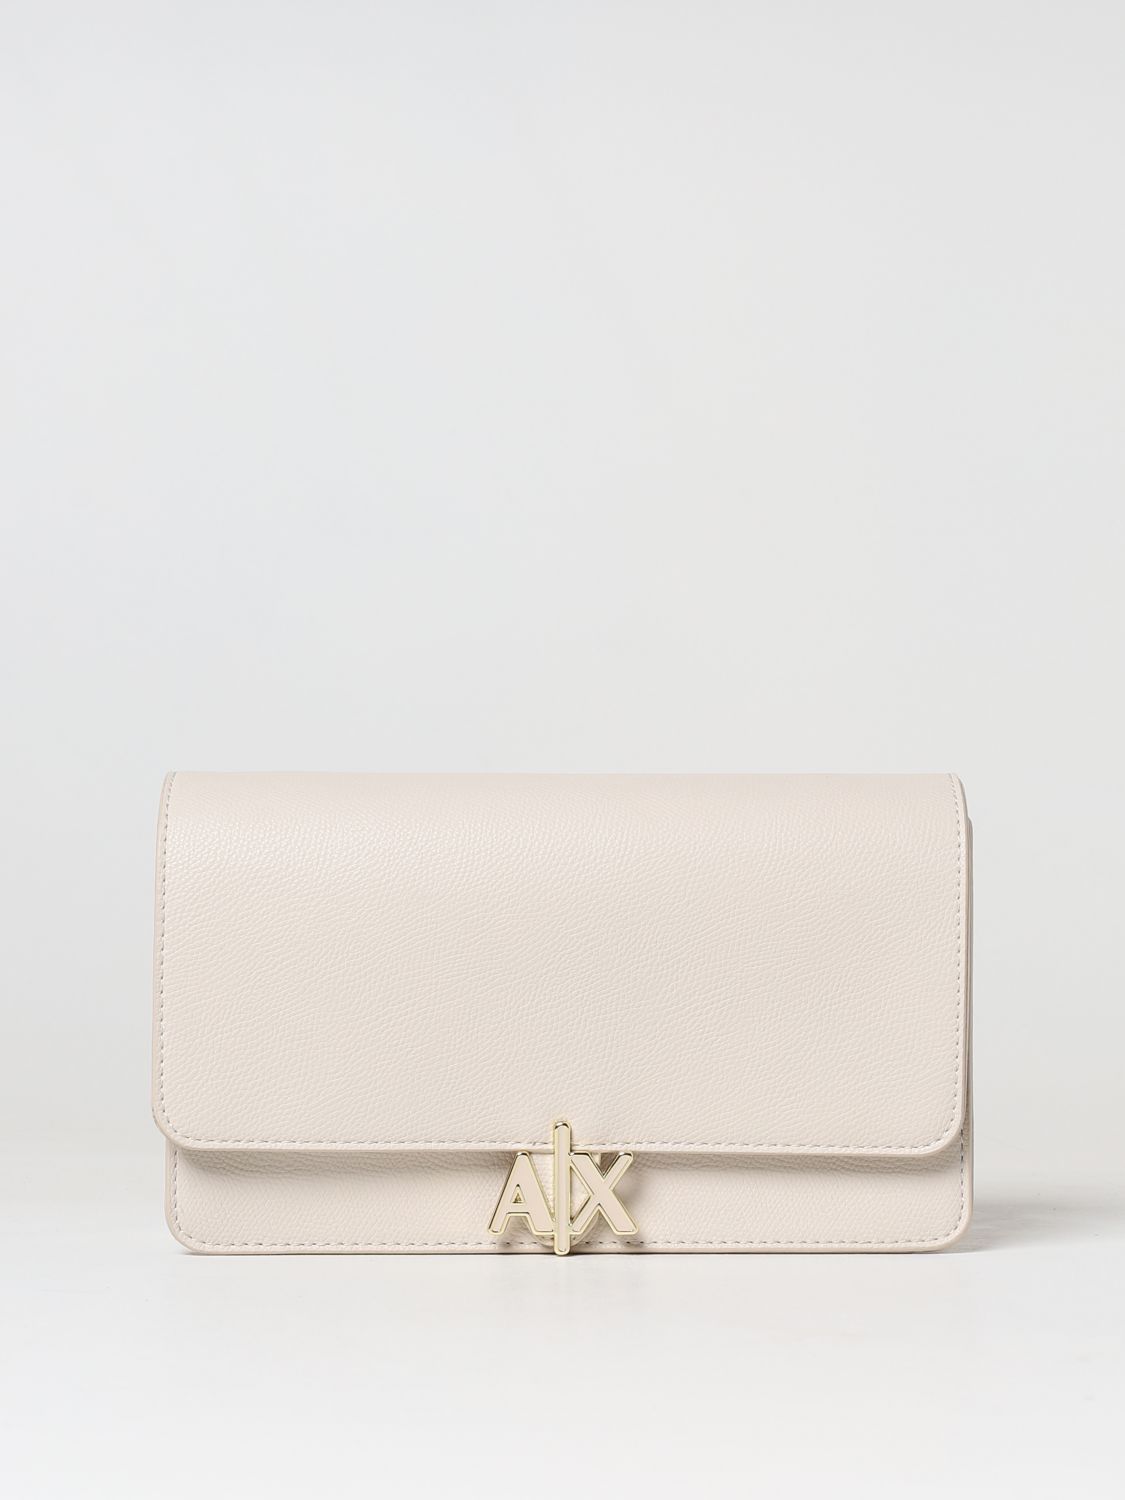 VALENTINO Divina Clutch  Buy bags, purses & accessories online